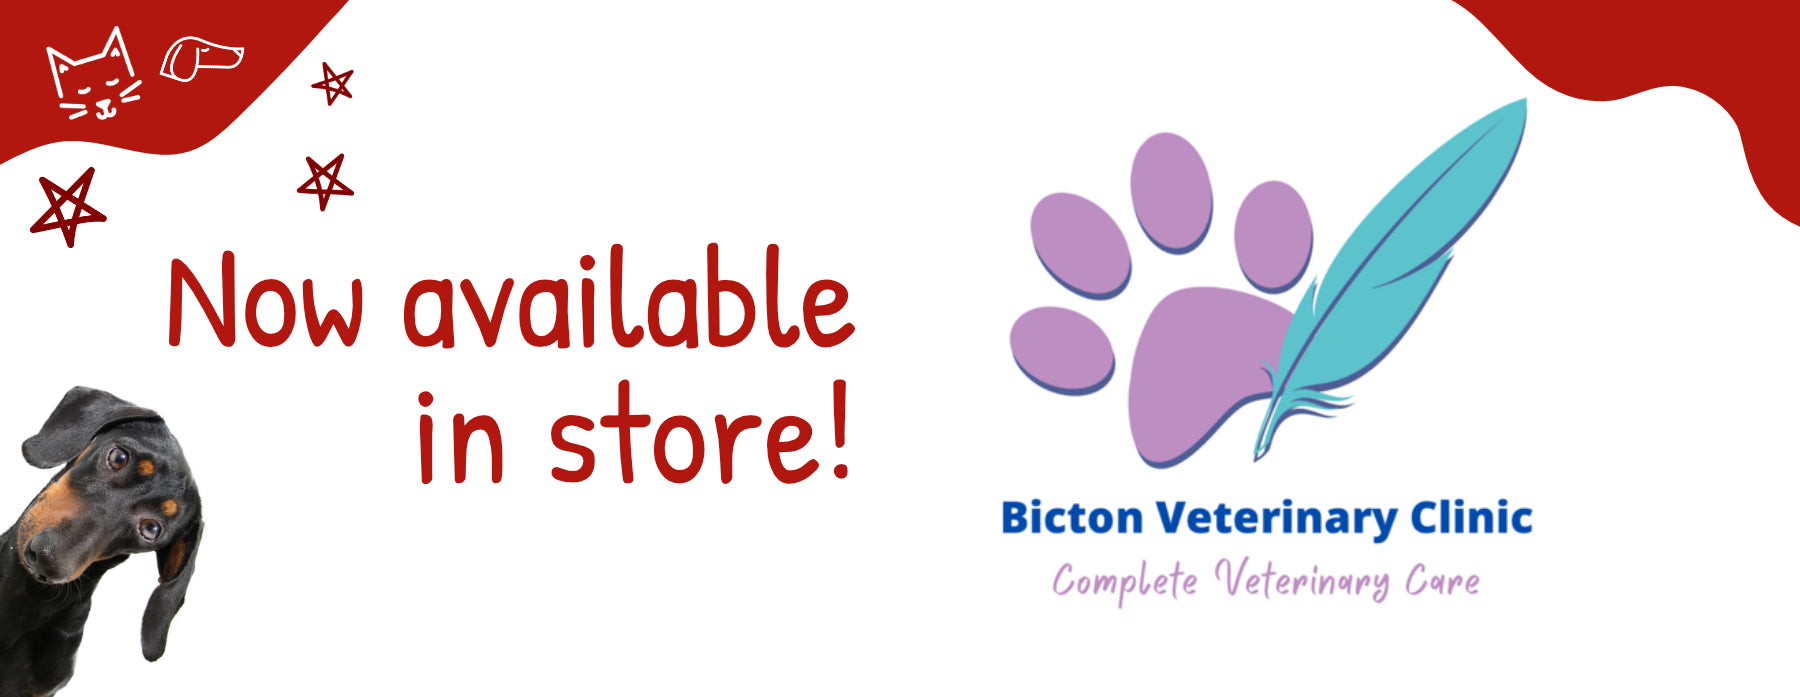 A banner for a vet clinic